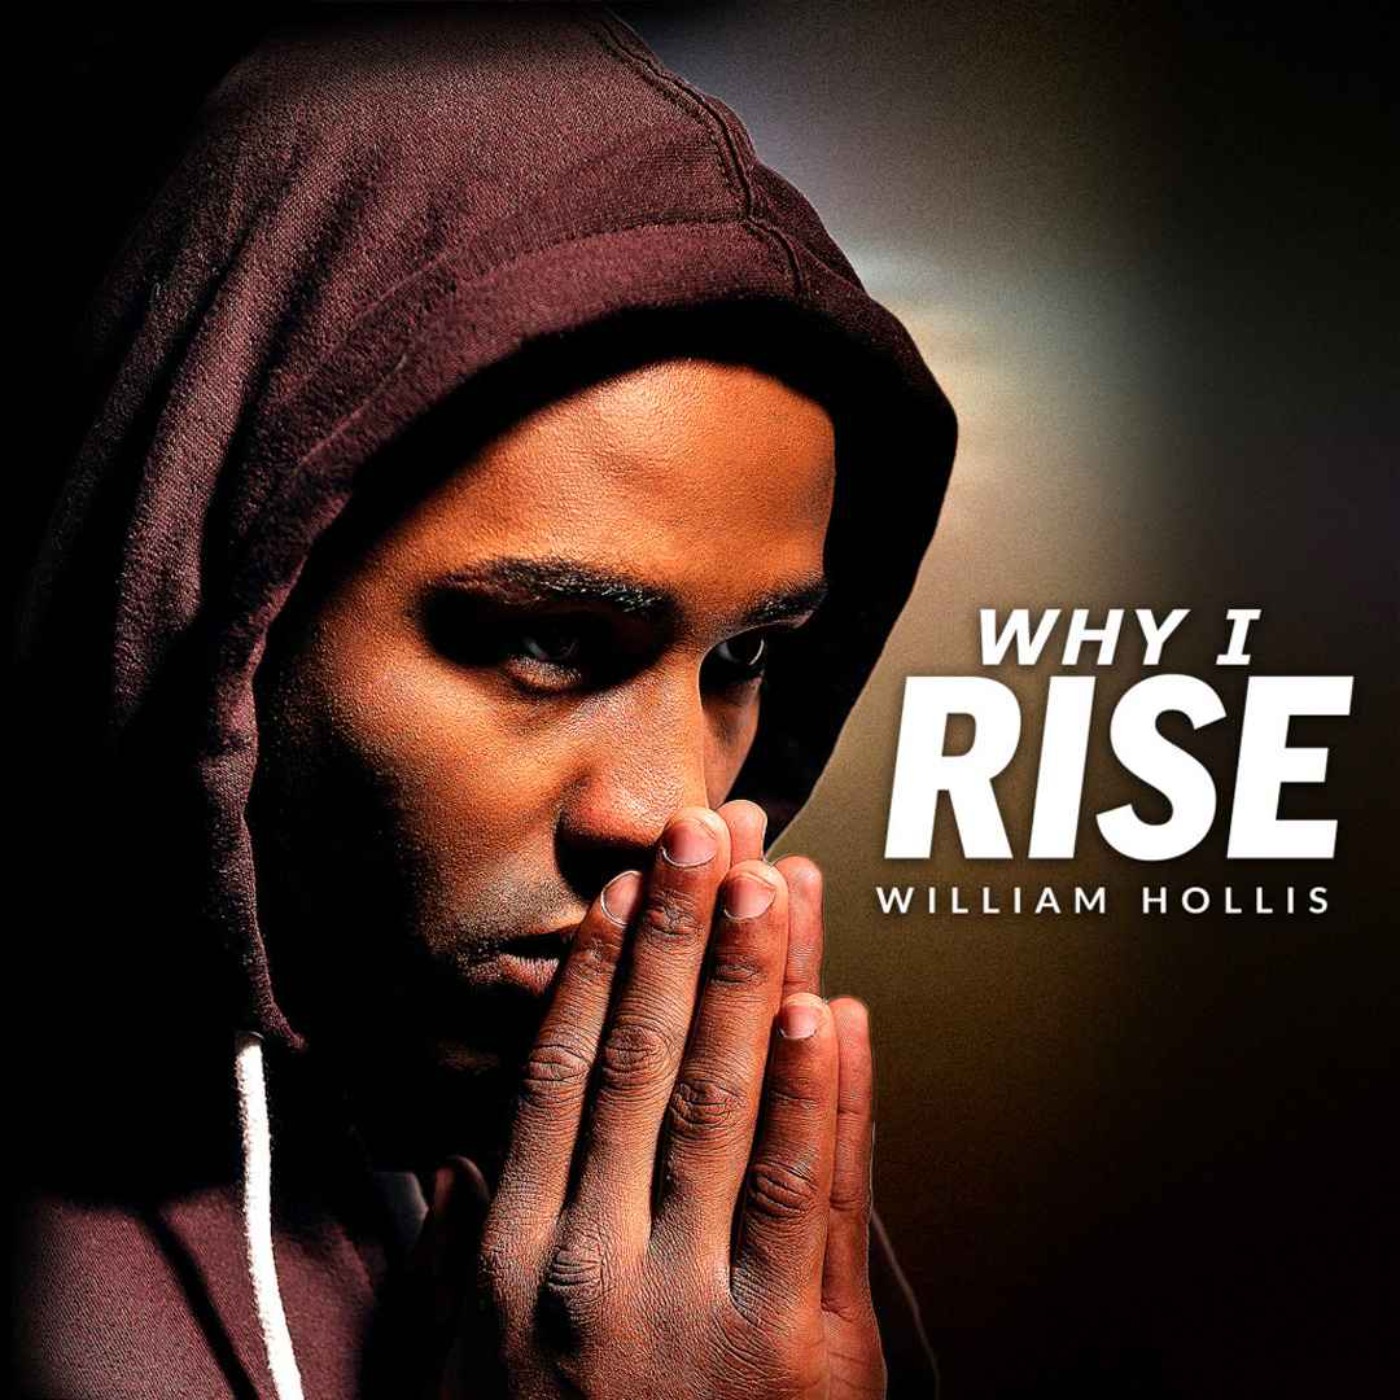 WHY I RISE - Powerful Motivational Speech (Featuring William Hollis)